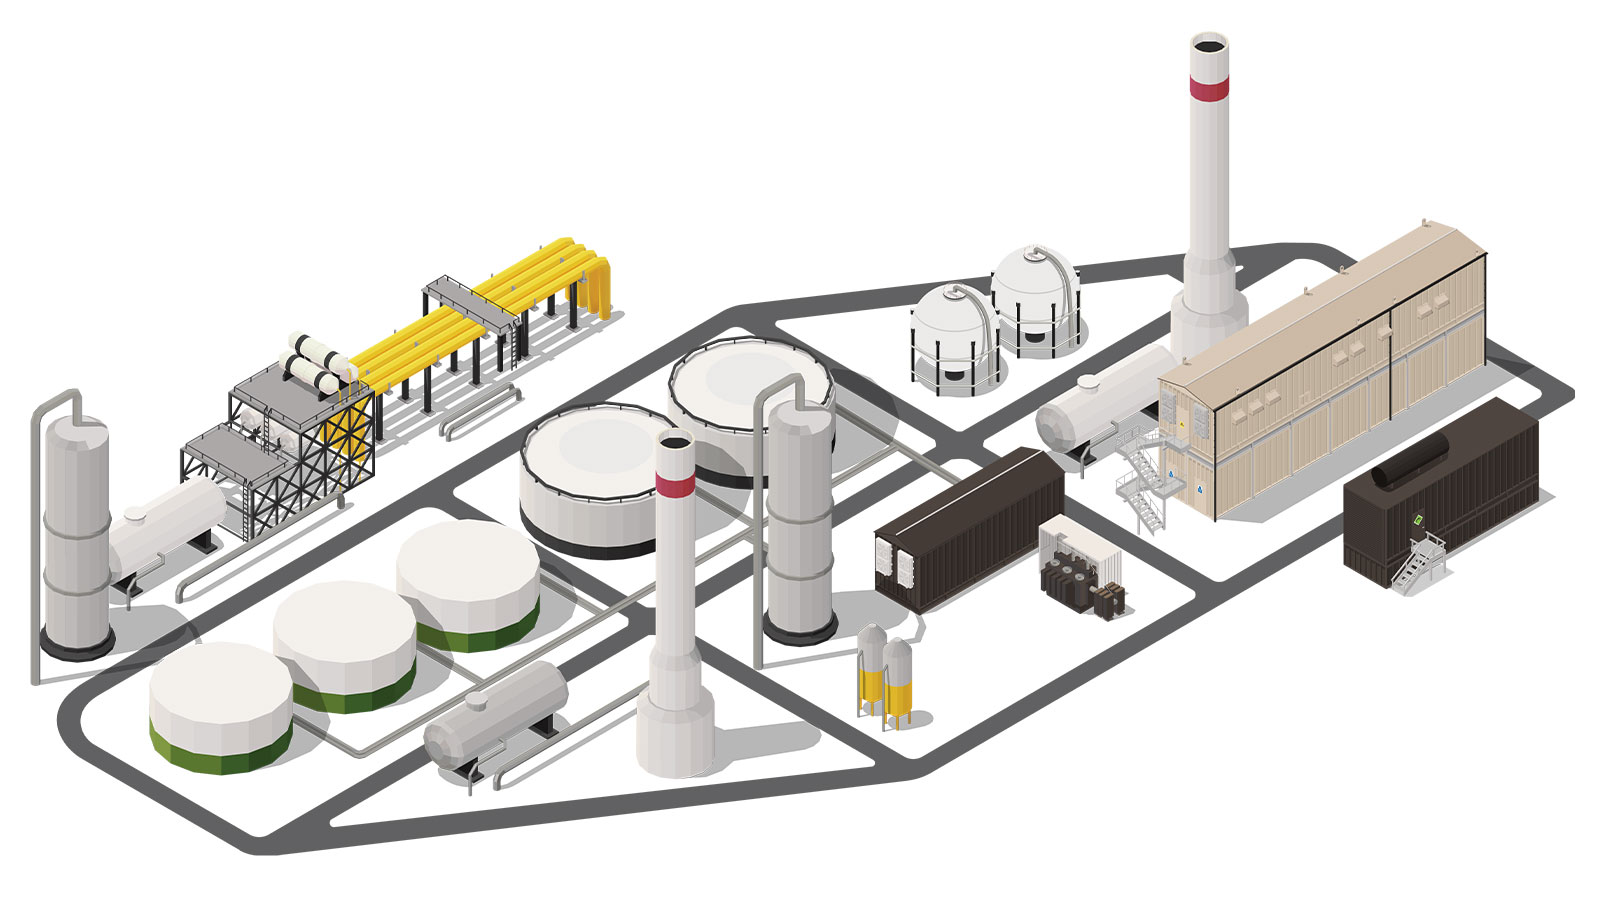 Petrochemical Industry Power Generation & Distribution Solutions